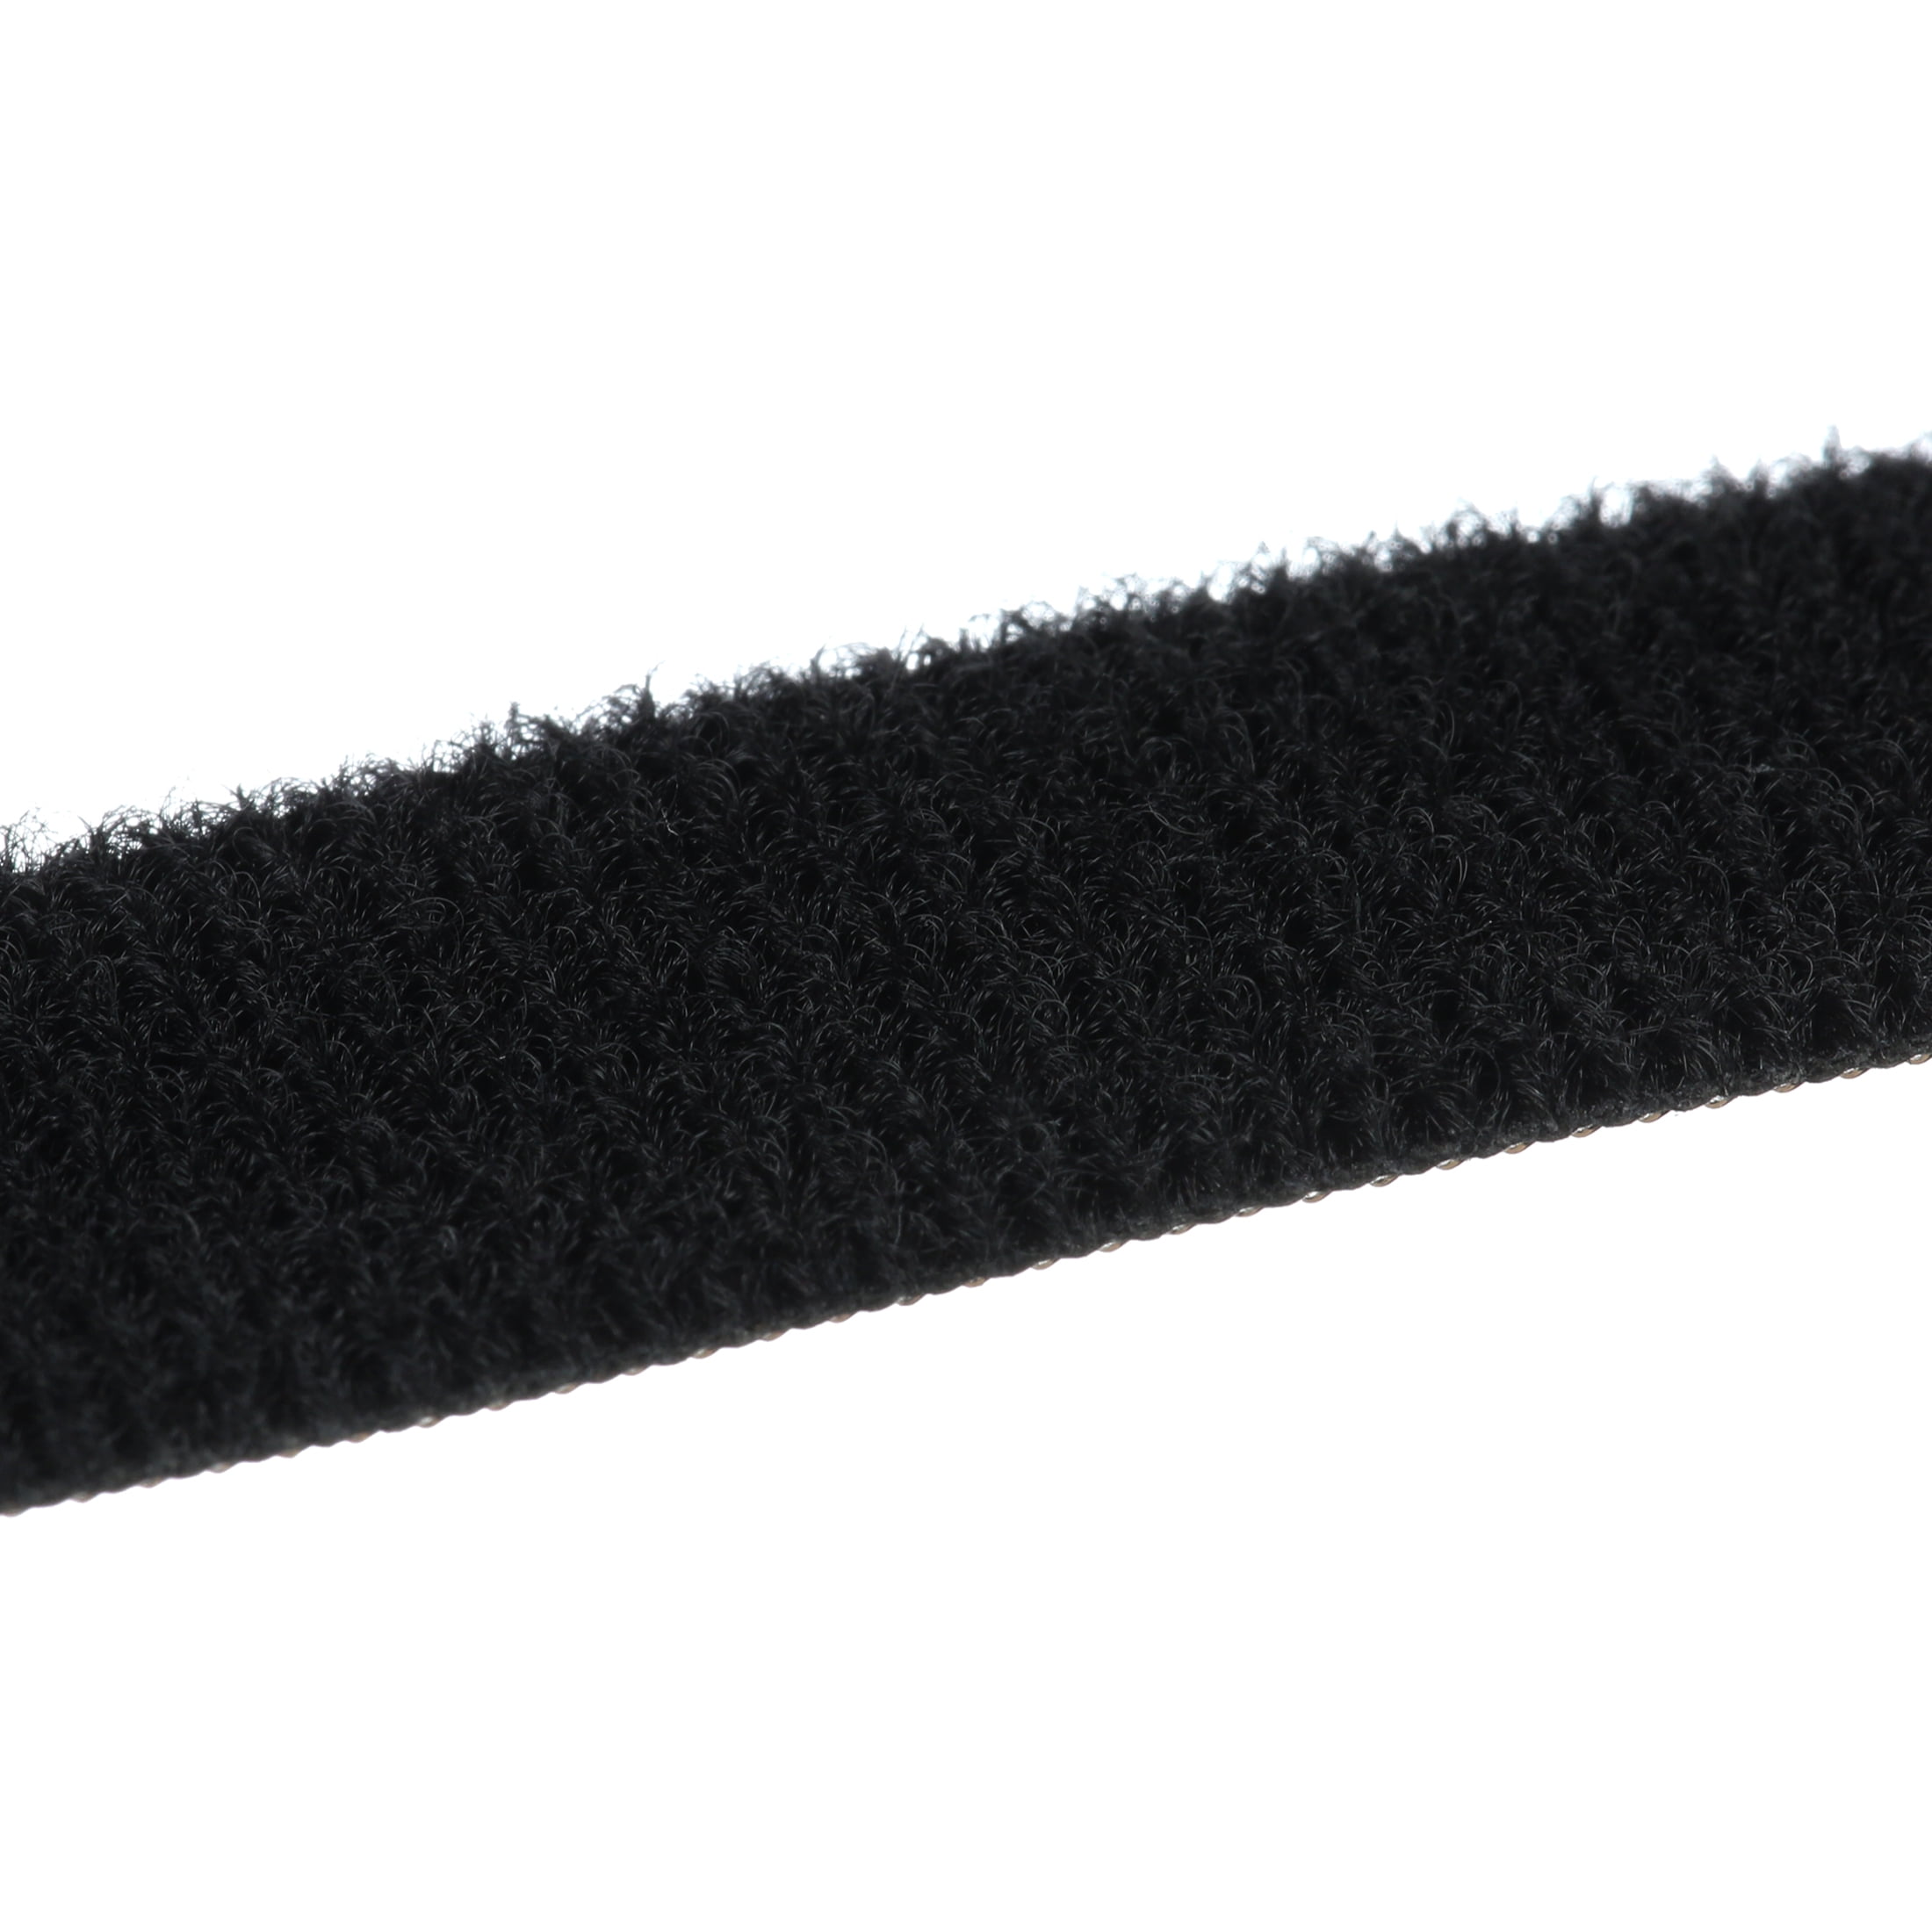 VELCRO Brand ONE-WRAP Roll Reusable Self-Gripping Hook and Loop , Cut Straps  4' x 3/4 Roll Black, 90302, ‎0.07 Pounds 